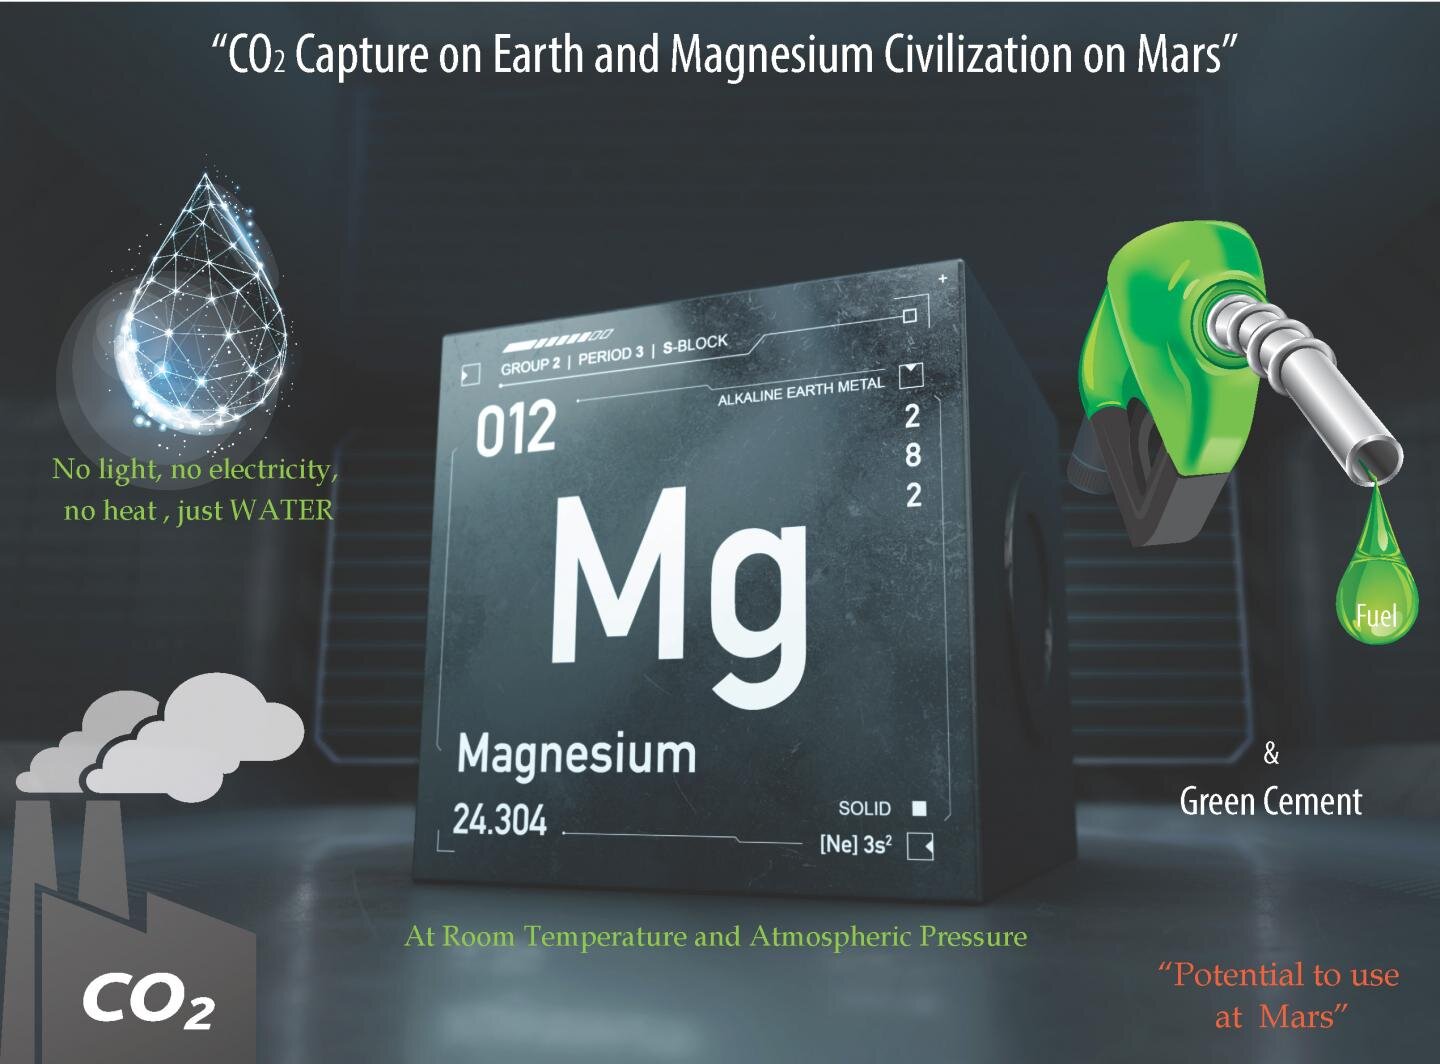 Carbon dioxide mitigation on Earth and magnesium civilization on Mars